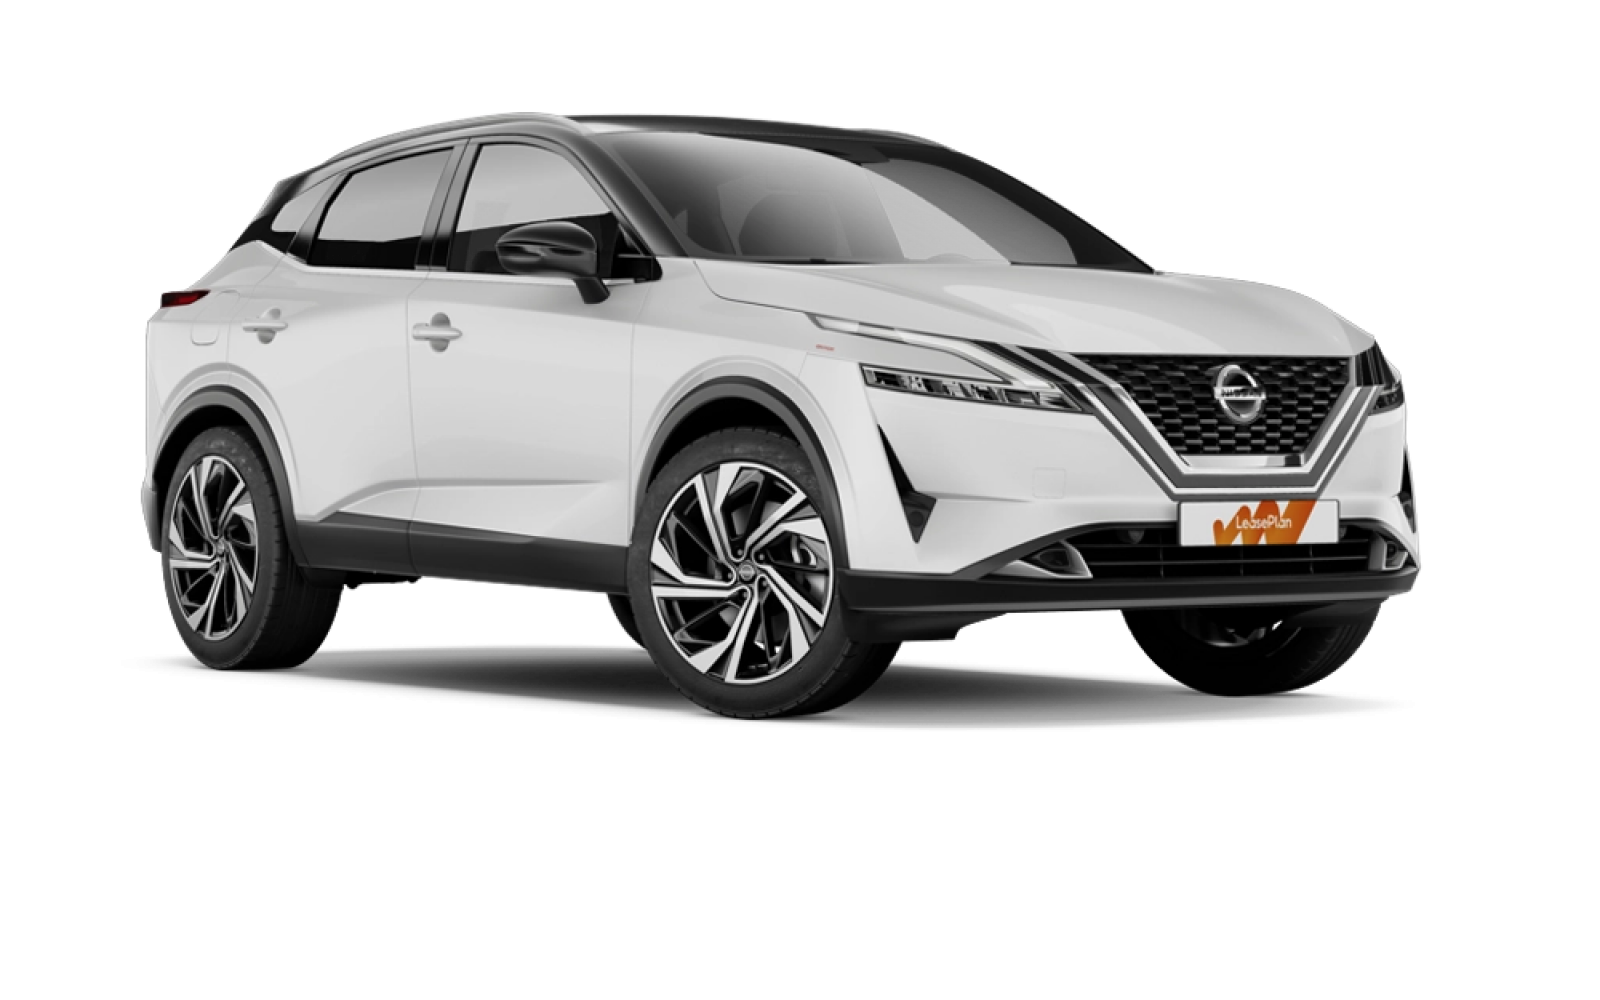 NISSAN Qashqai E-POWER 190 2WD N-Connecta large 2826 - operativní leasing